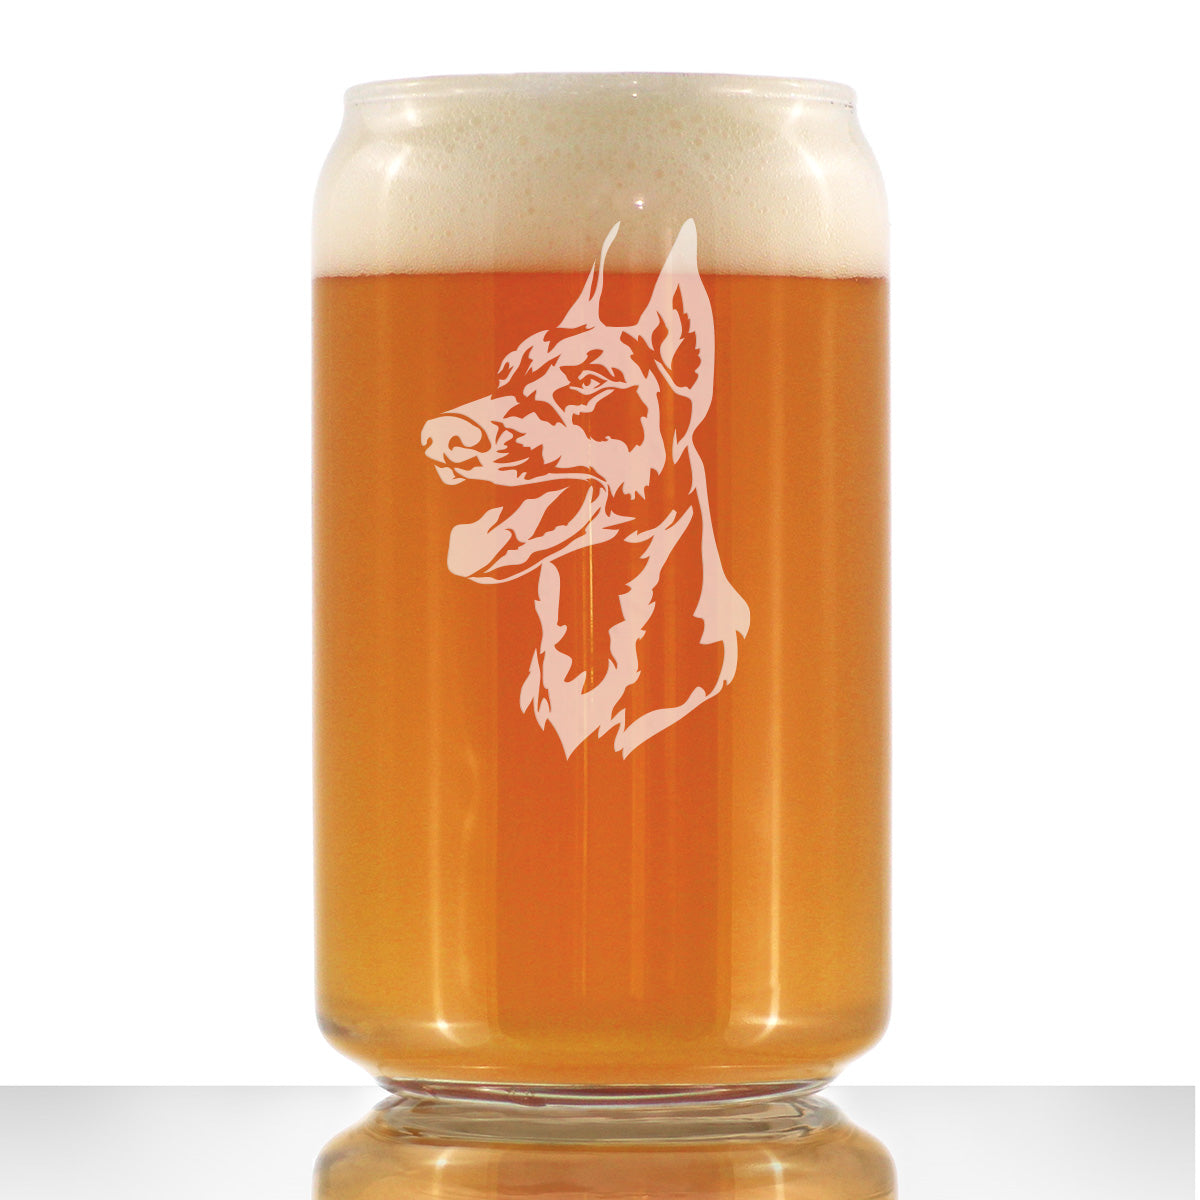 Doberman Face Beer Can Pint Glass - Unique Dog Themed Decor and Gifts for Moms &amp; Dads of Pinscher Dobermans - 16 Oz